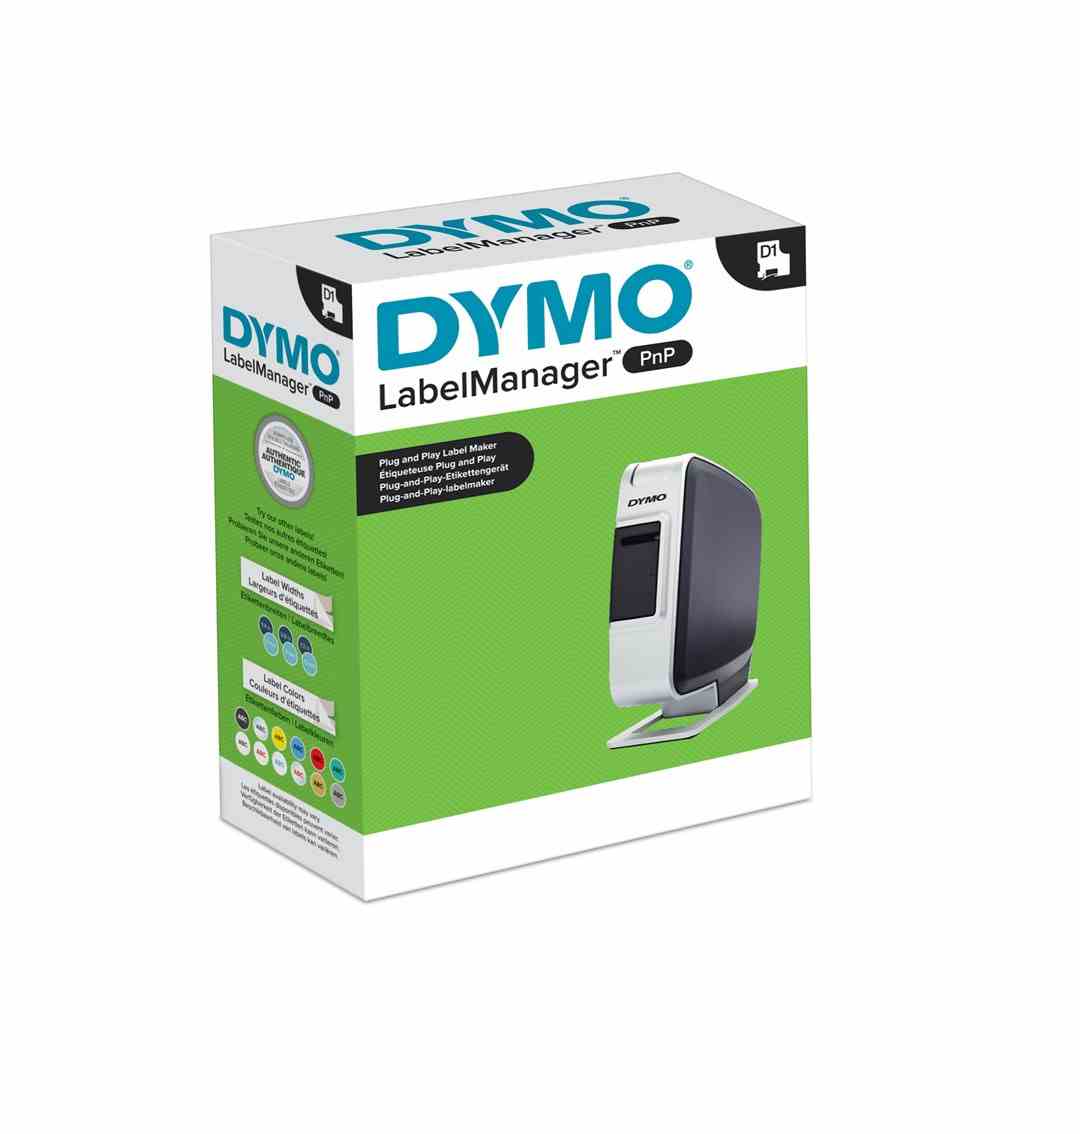 DYMO LabelManager PnP